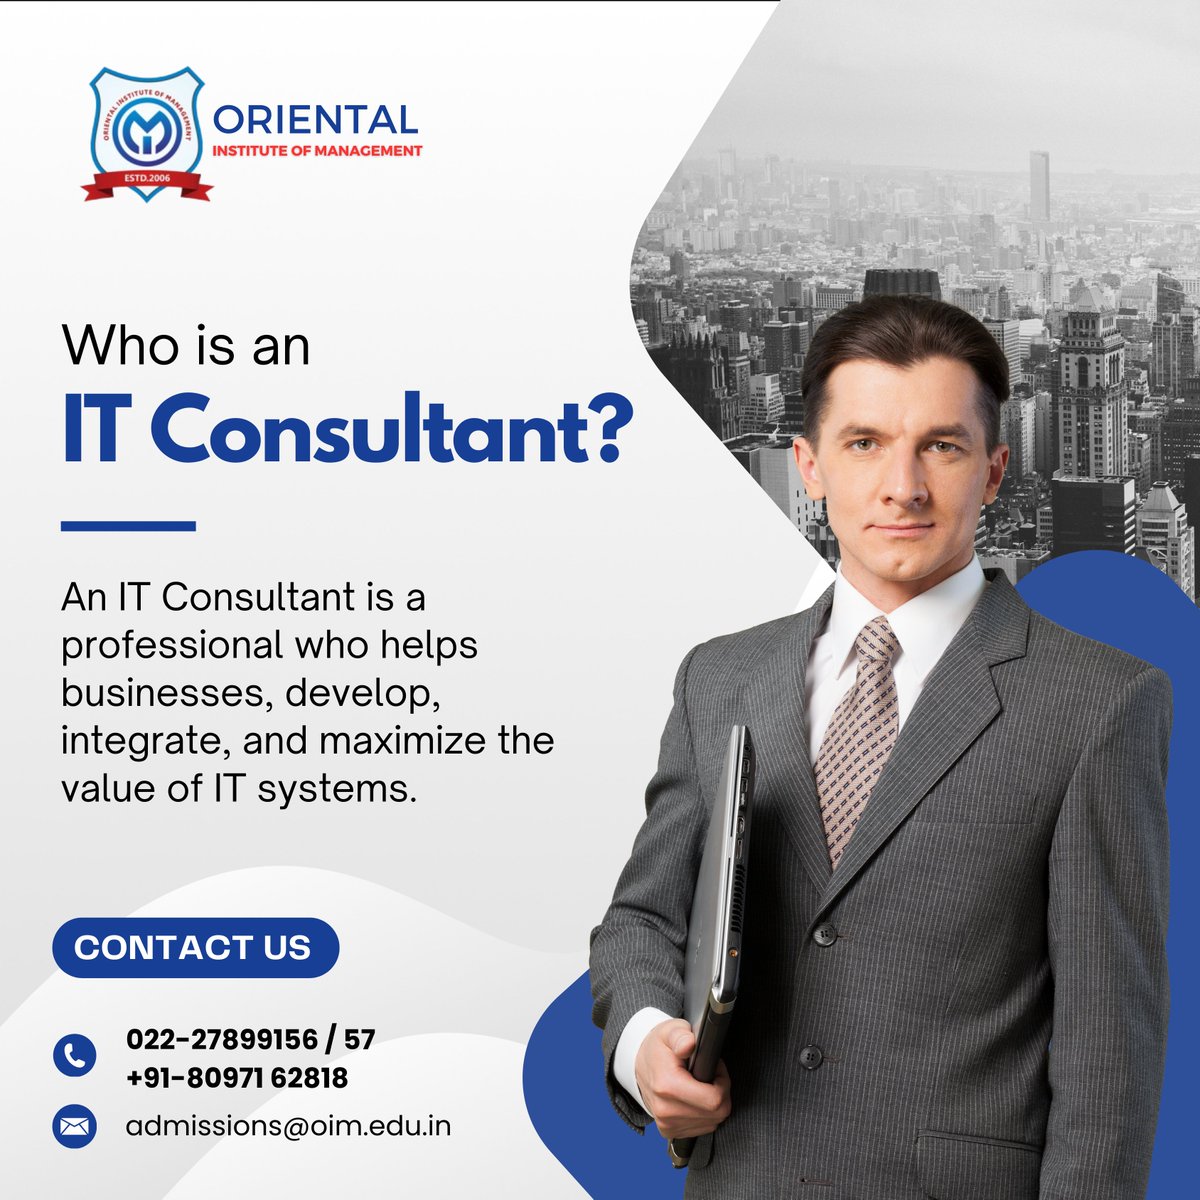 An IT Consultant also provides strategic advice, troubleshoot technical issues and offer expertise in hardware, software systems and other management related issues.

#OIM #ITConsultant #MBA #CollegeAdmissions #ManagementInstitute #careergoals #CareerGrowth #colleges